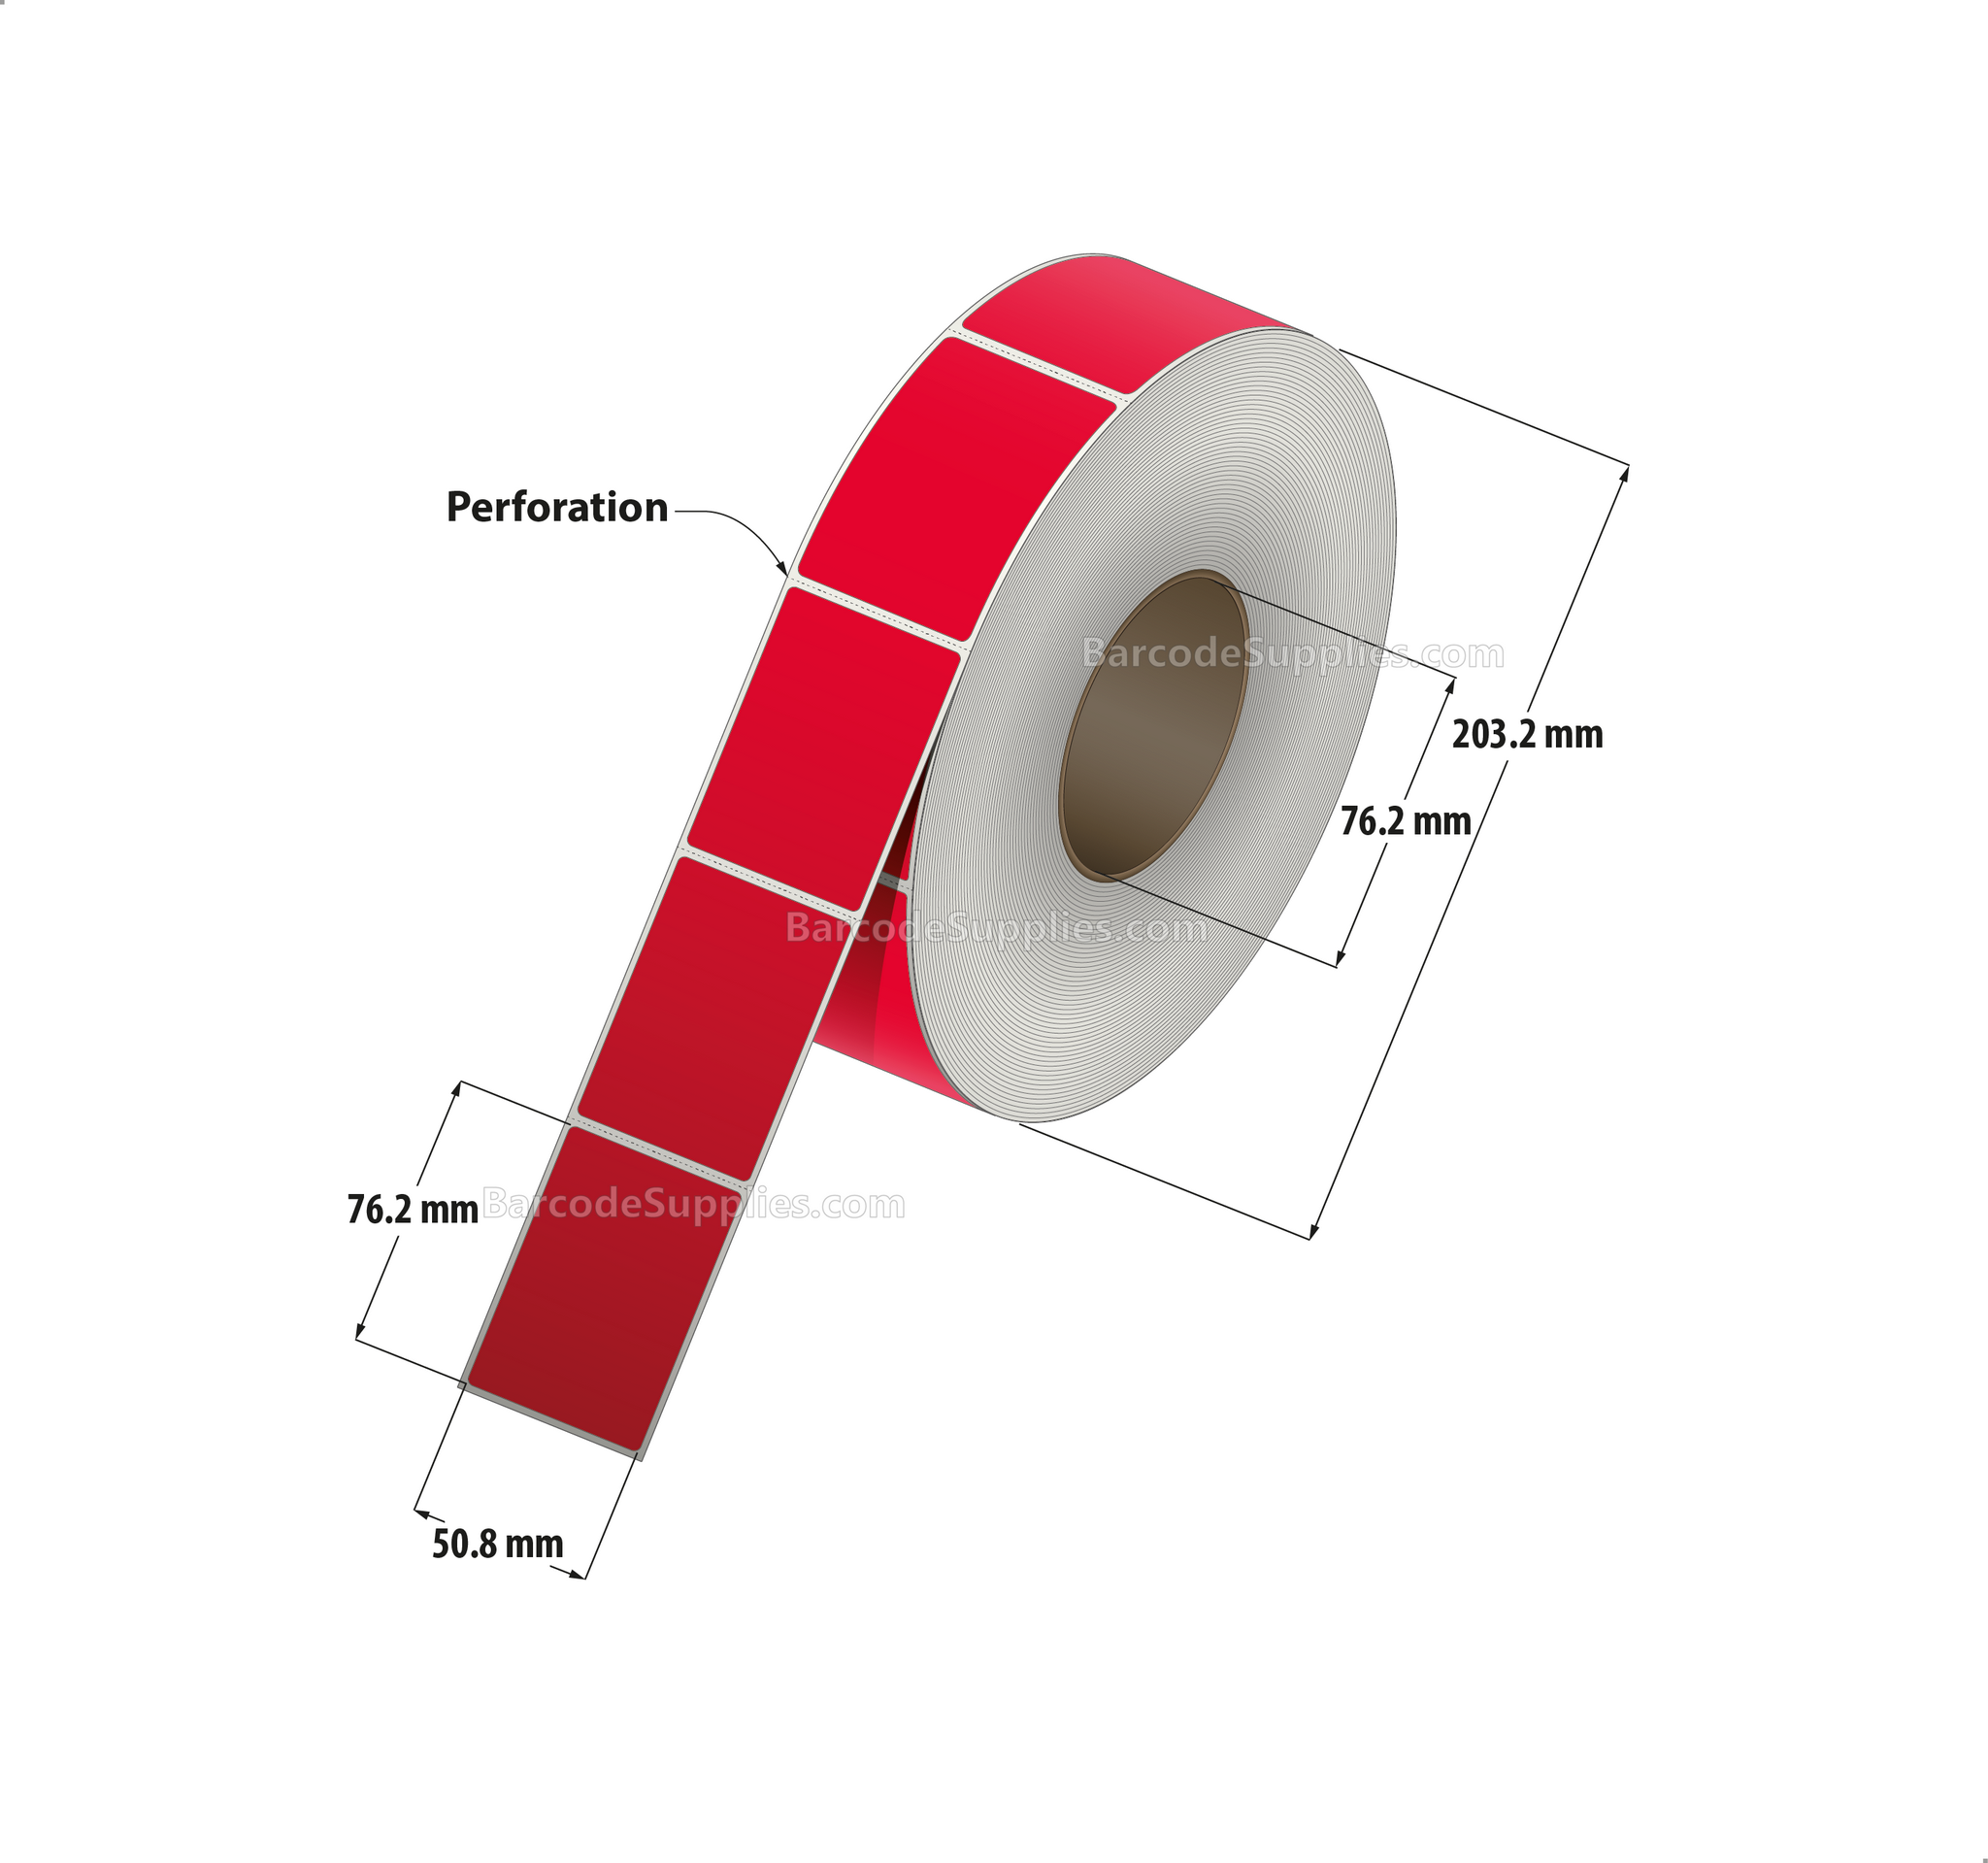 2 x 3 Thermal Transfer 032 Red Labels With Permanent Adhesive - Perforated - 1900 Labels Per Roll - Carton Of 8 Rolls - 15200 Labels Total - MPN: RFC-2-3-1900-RD